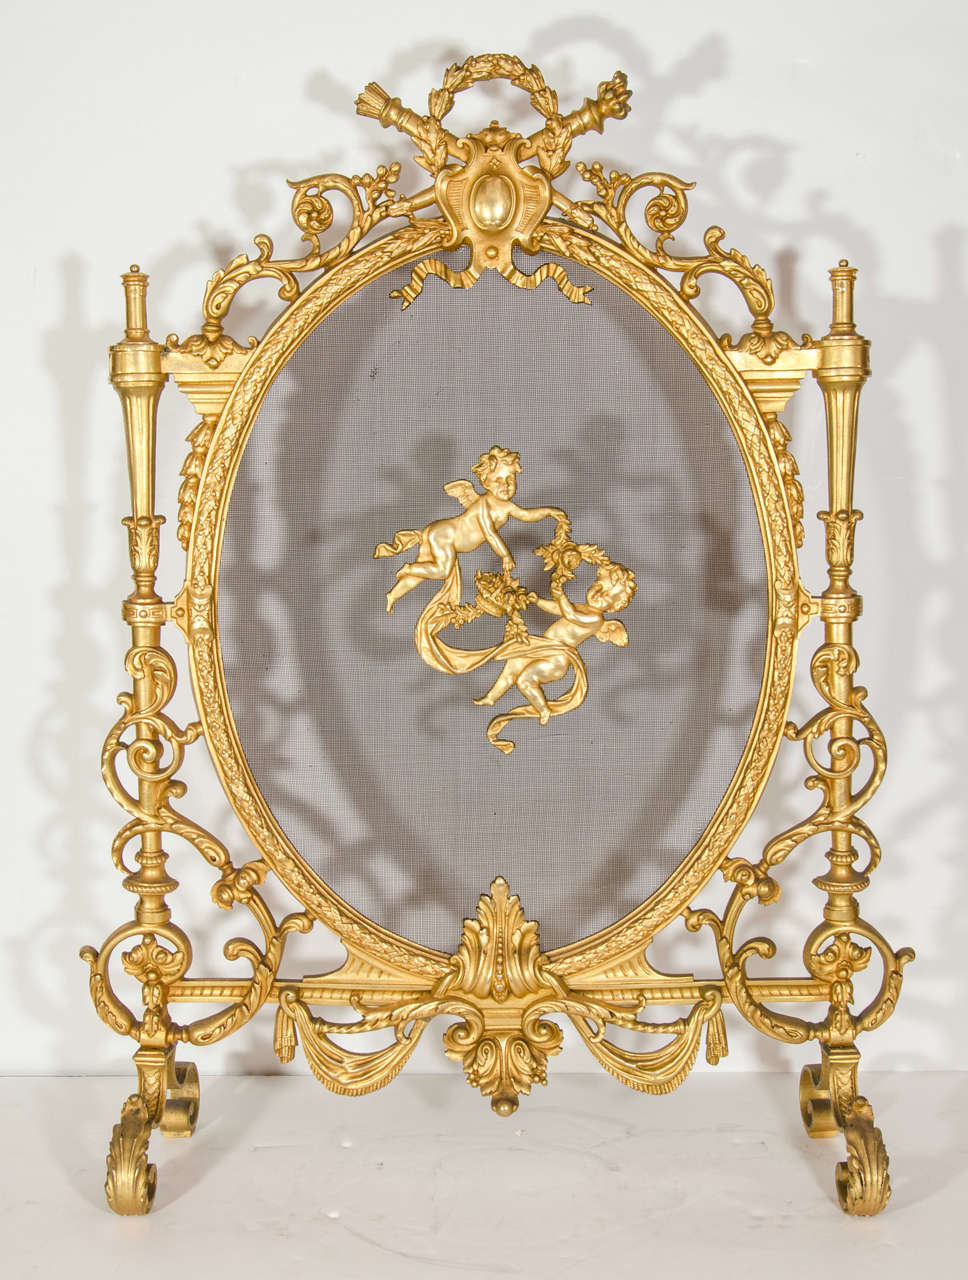 A UNIQUE ANTIQUE FRENCH LOUIS XVI GILT BRONZE FIRE SCREEN OF FINE QUALITY EMBELLISHED WITH GILT BRONZE CUPIDS, 19TH CENTURY.